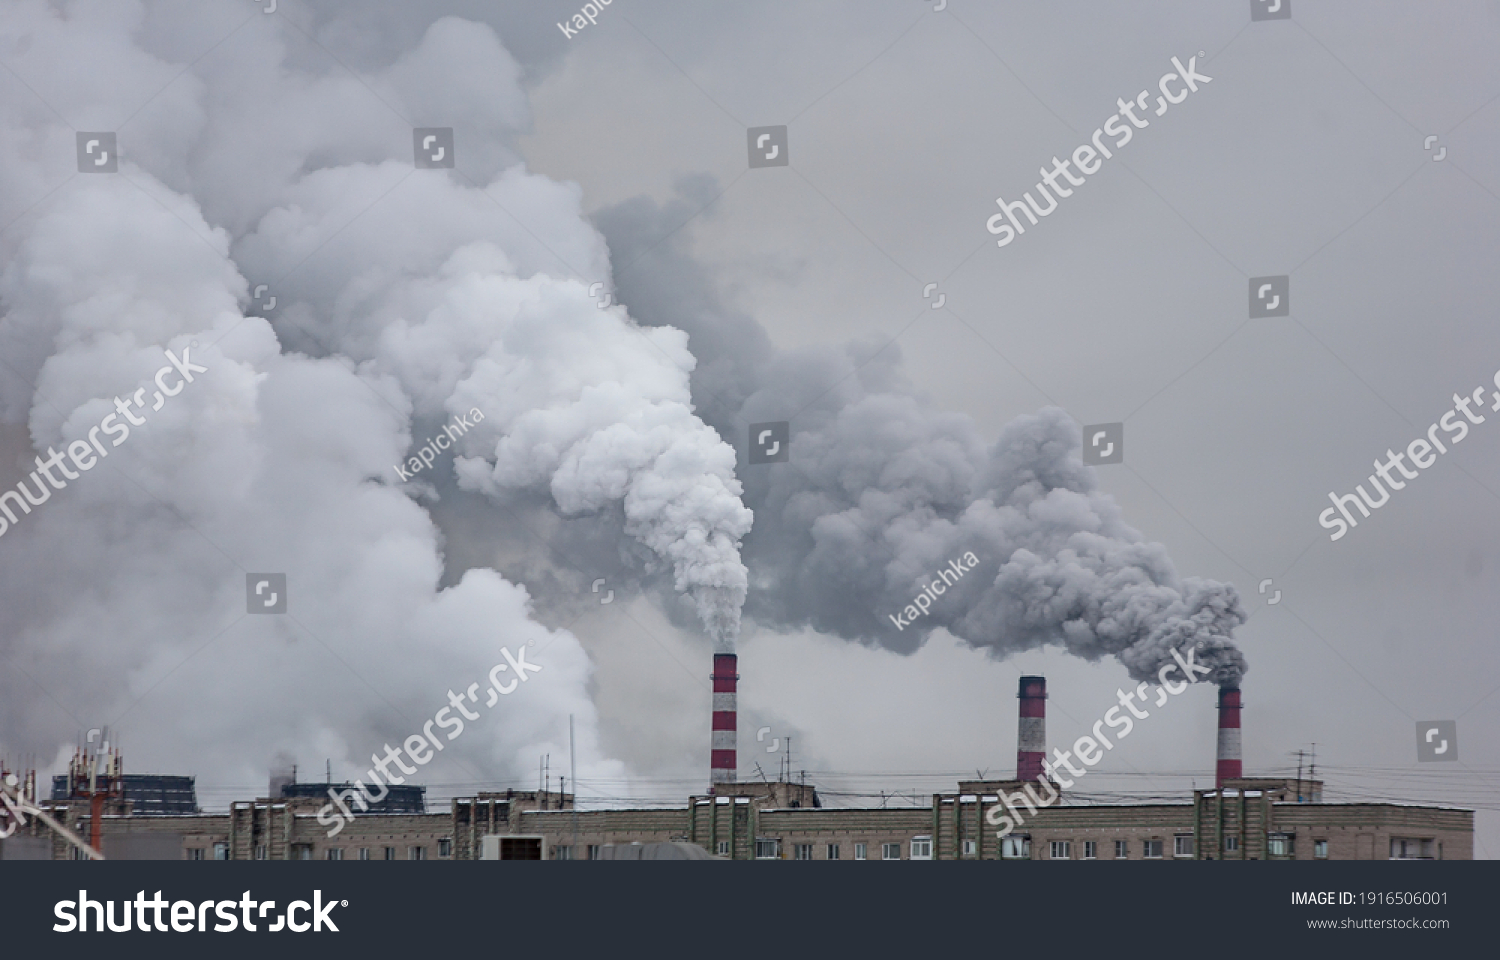 industrial chimneys with heavy smoke causing air pollution on the gray smoky sky background #1916506001